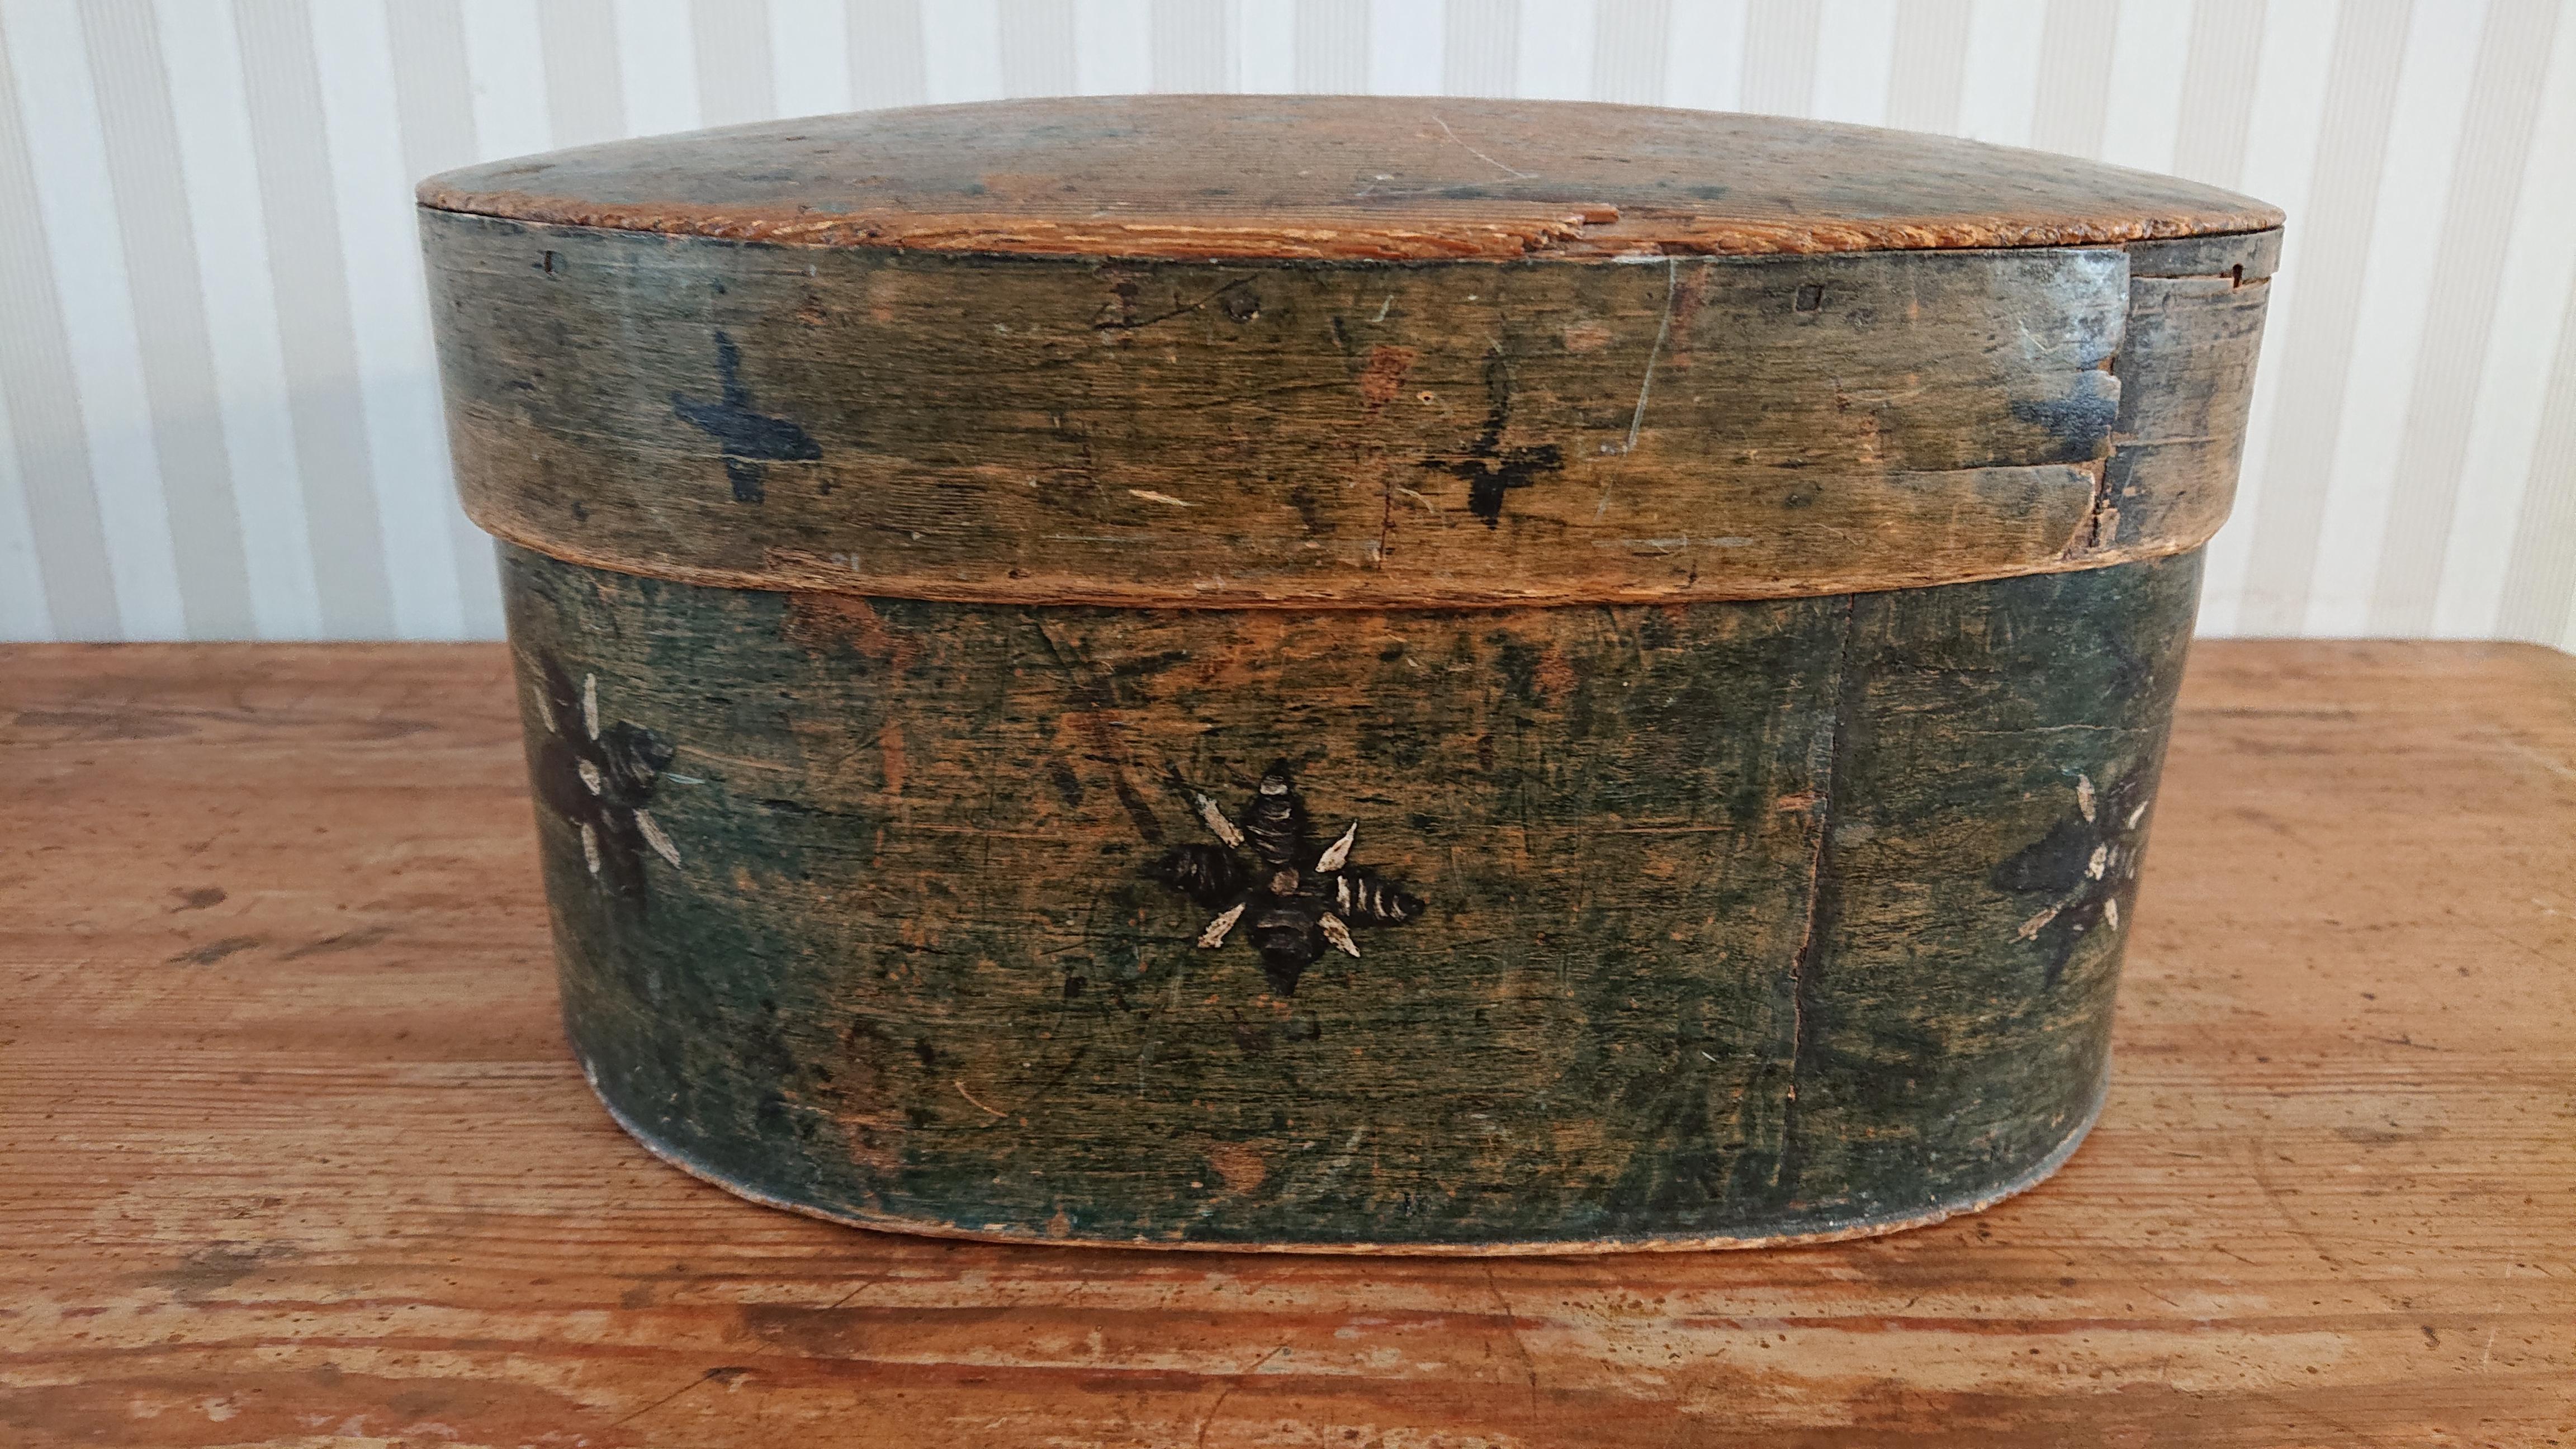 19th Century Swedish Folk Art Bentwood Box from Umeå Västerbotten , Northern Sweden.
Oval box with lid
Originalpainted with nice patina after several hundred years of use.
Owner marks sign at the bottom POLS.
Valuables were stored in these